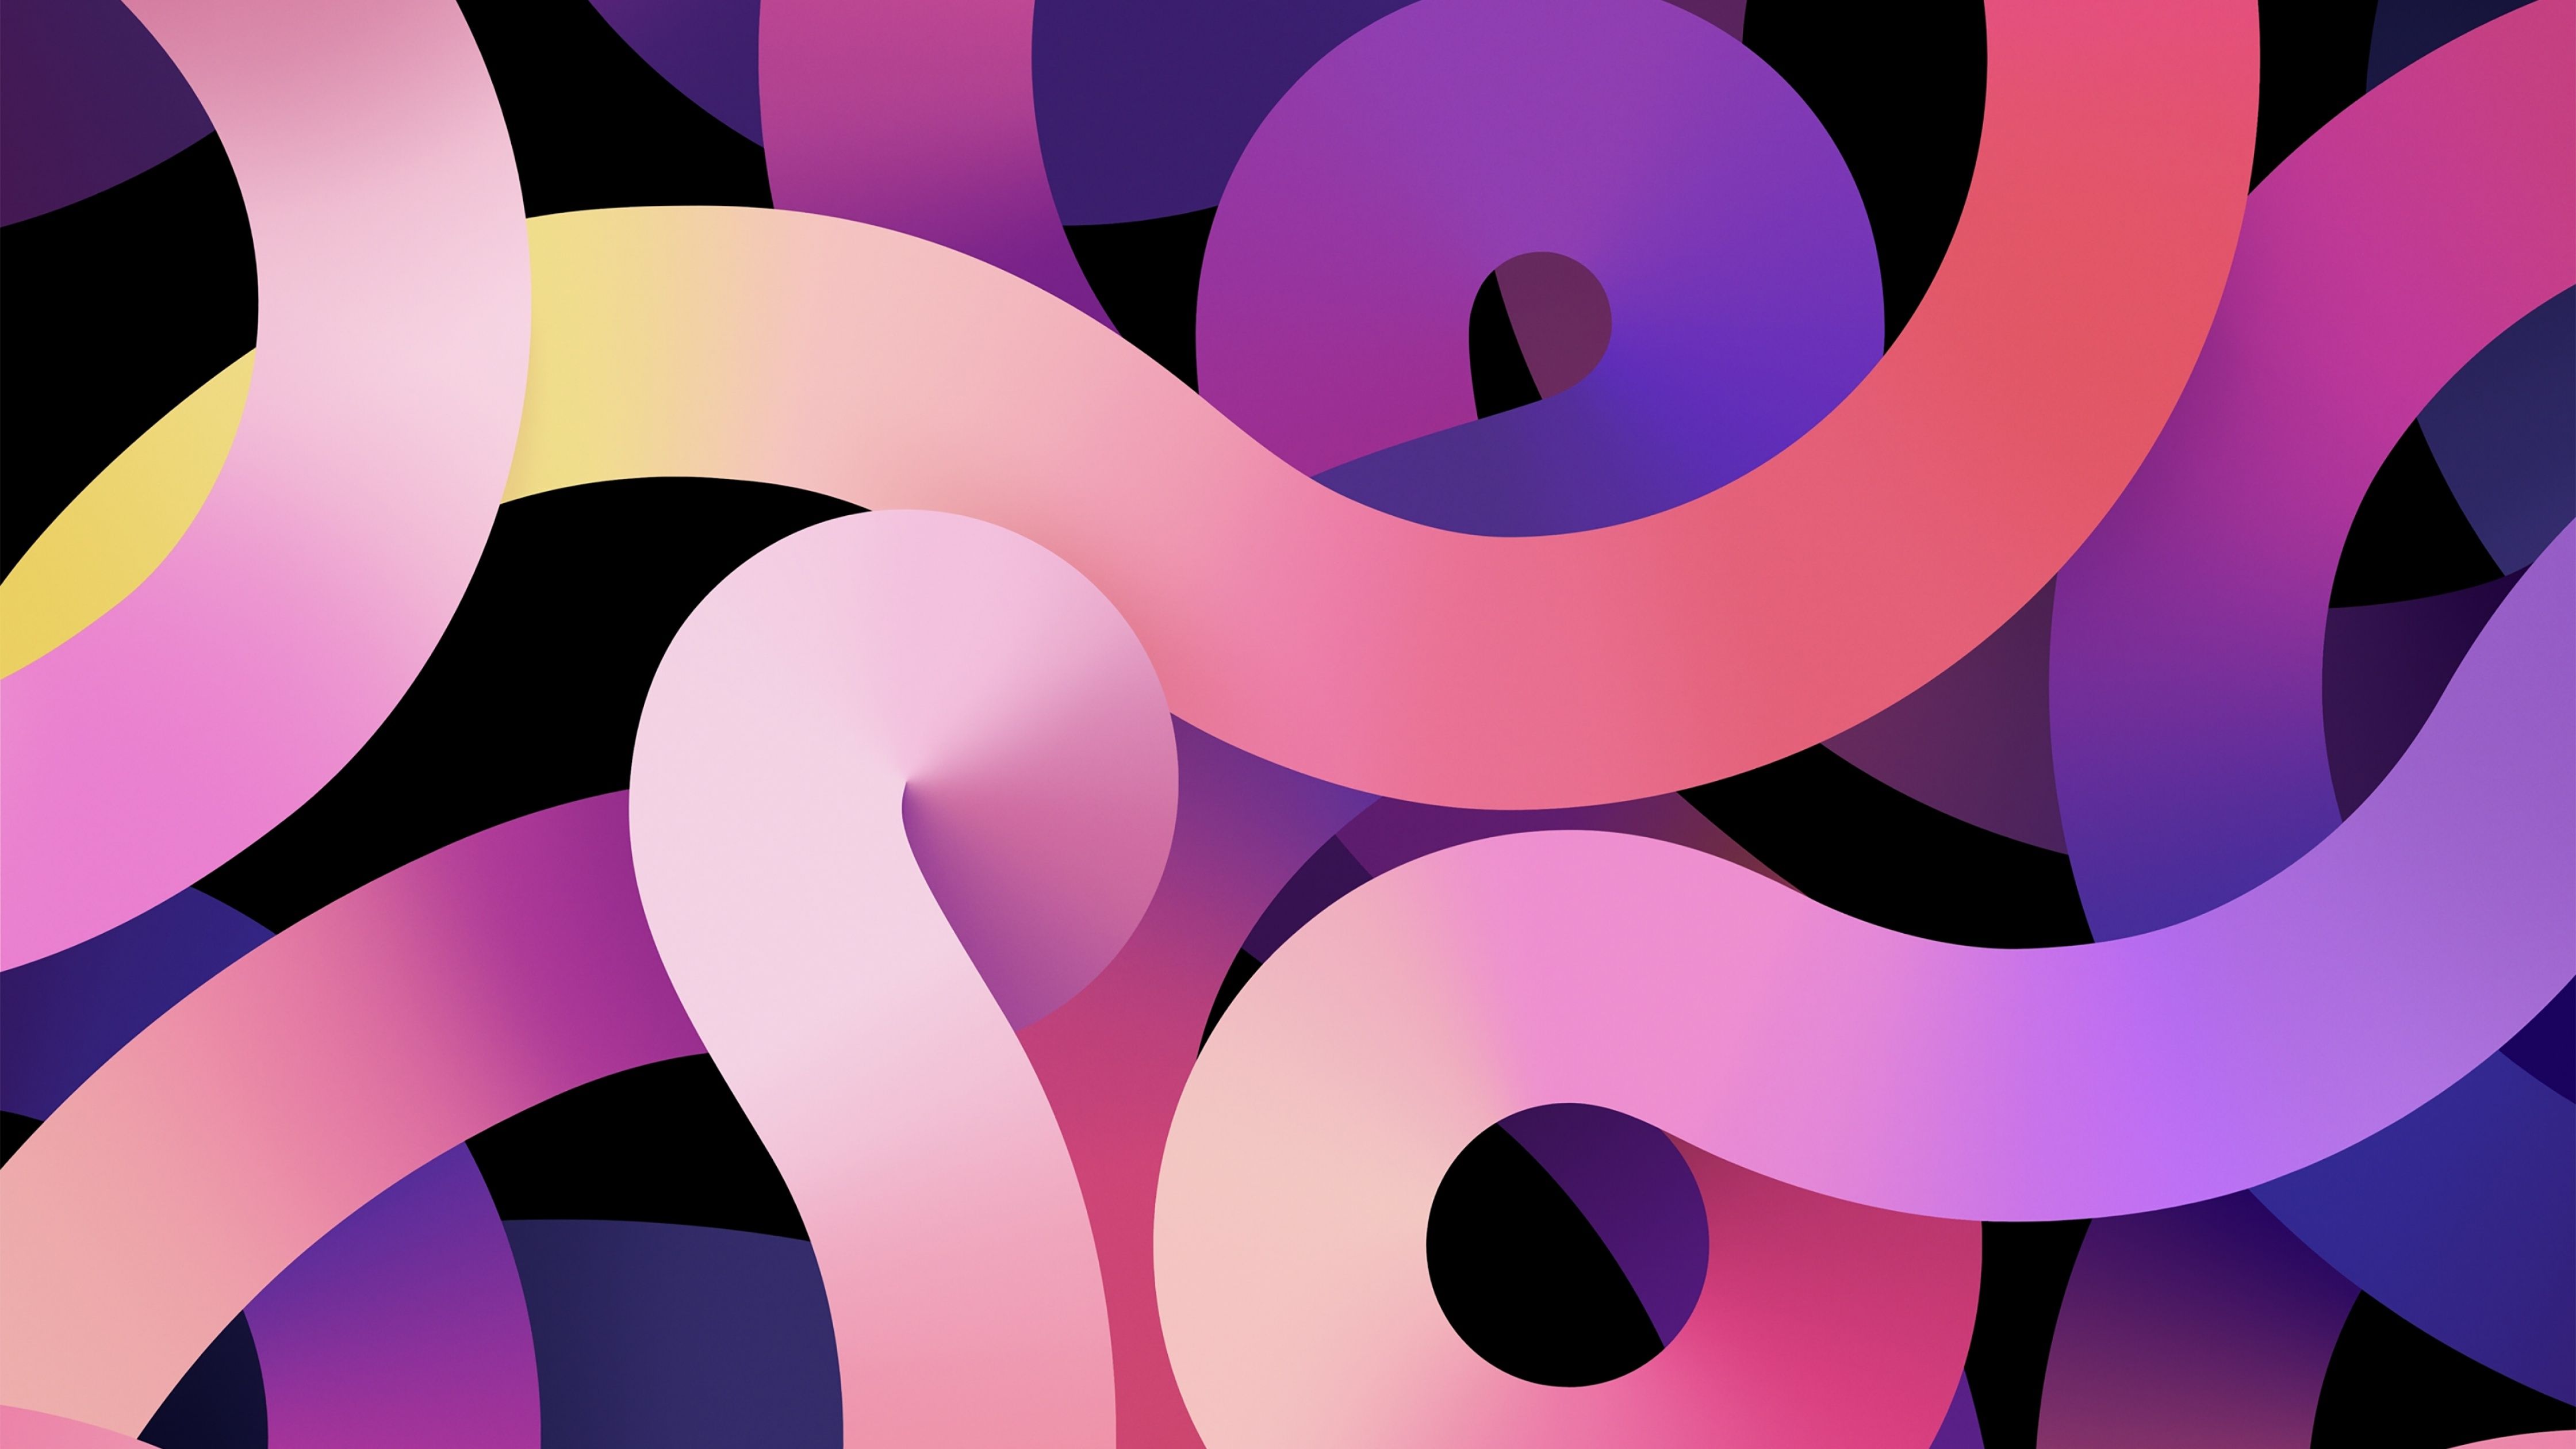 A colorful abstract pattern of wavy lines - HD, hot pink